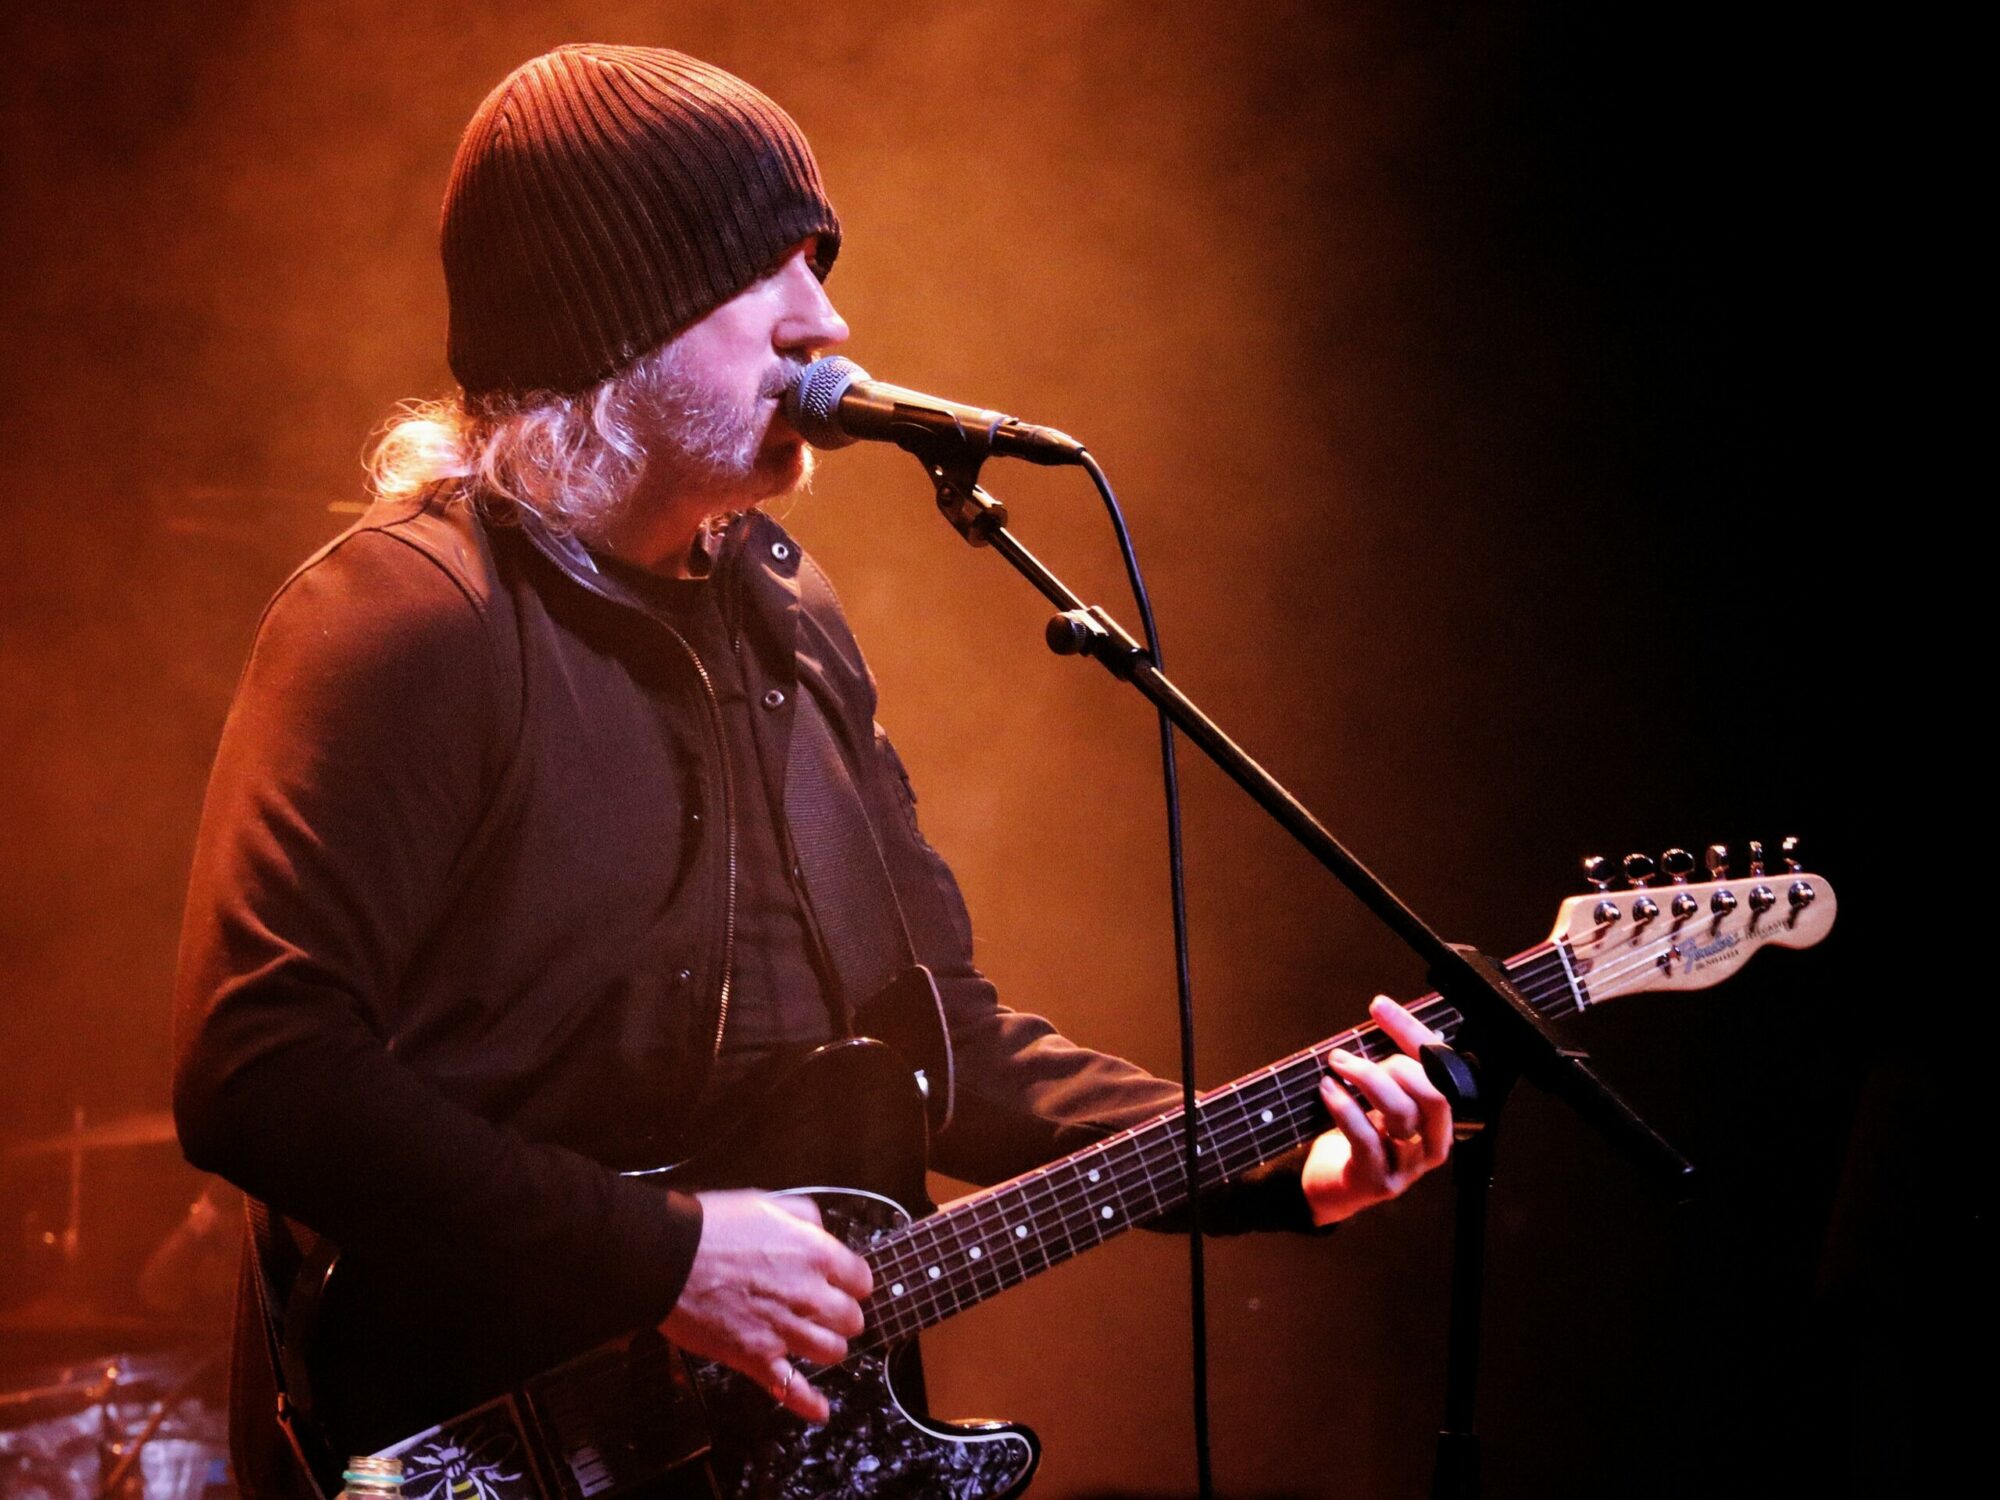 Image name Badly Drawn Boy at The Crescent York scaled the 3 image from the post Badly Drawn Boy at Social, Hull in Yorkshire.com.